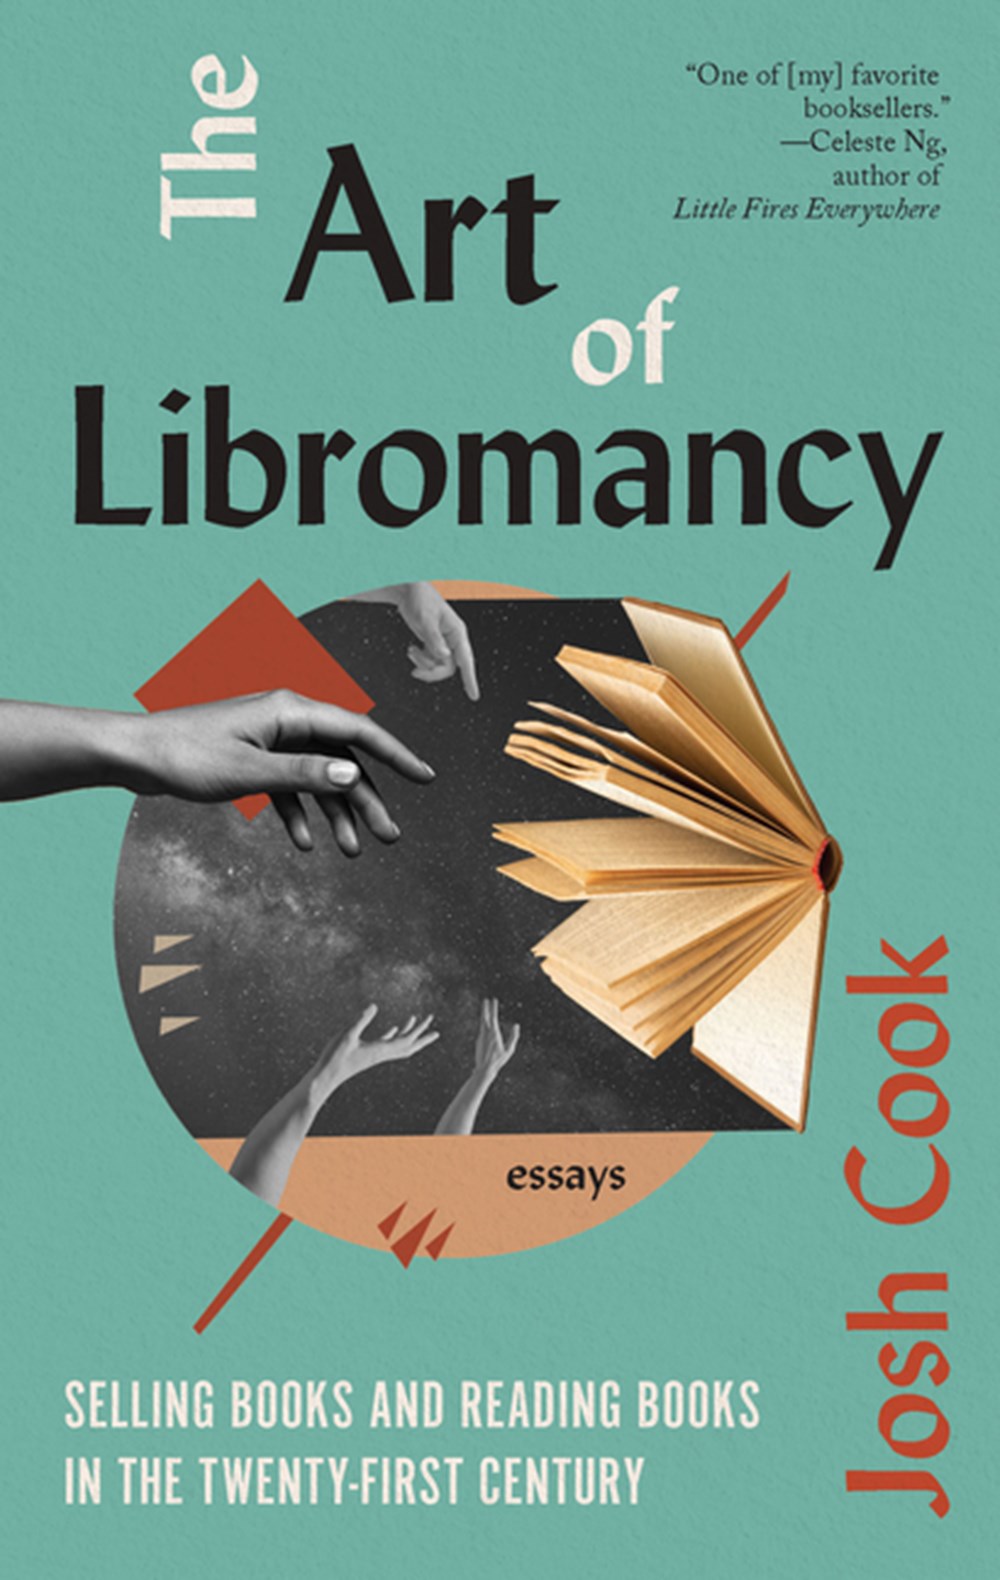 Art of Libromancy: On Selling Books and Reading Books in the Twenty-First Century